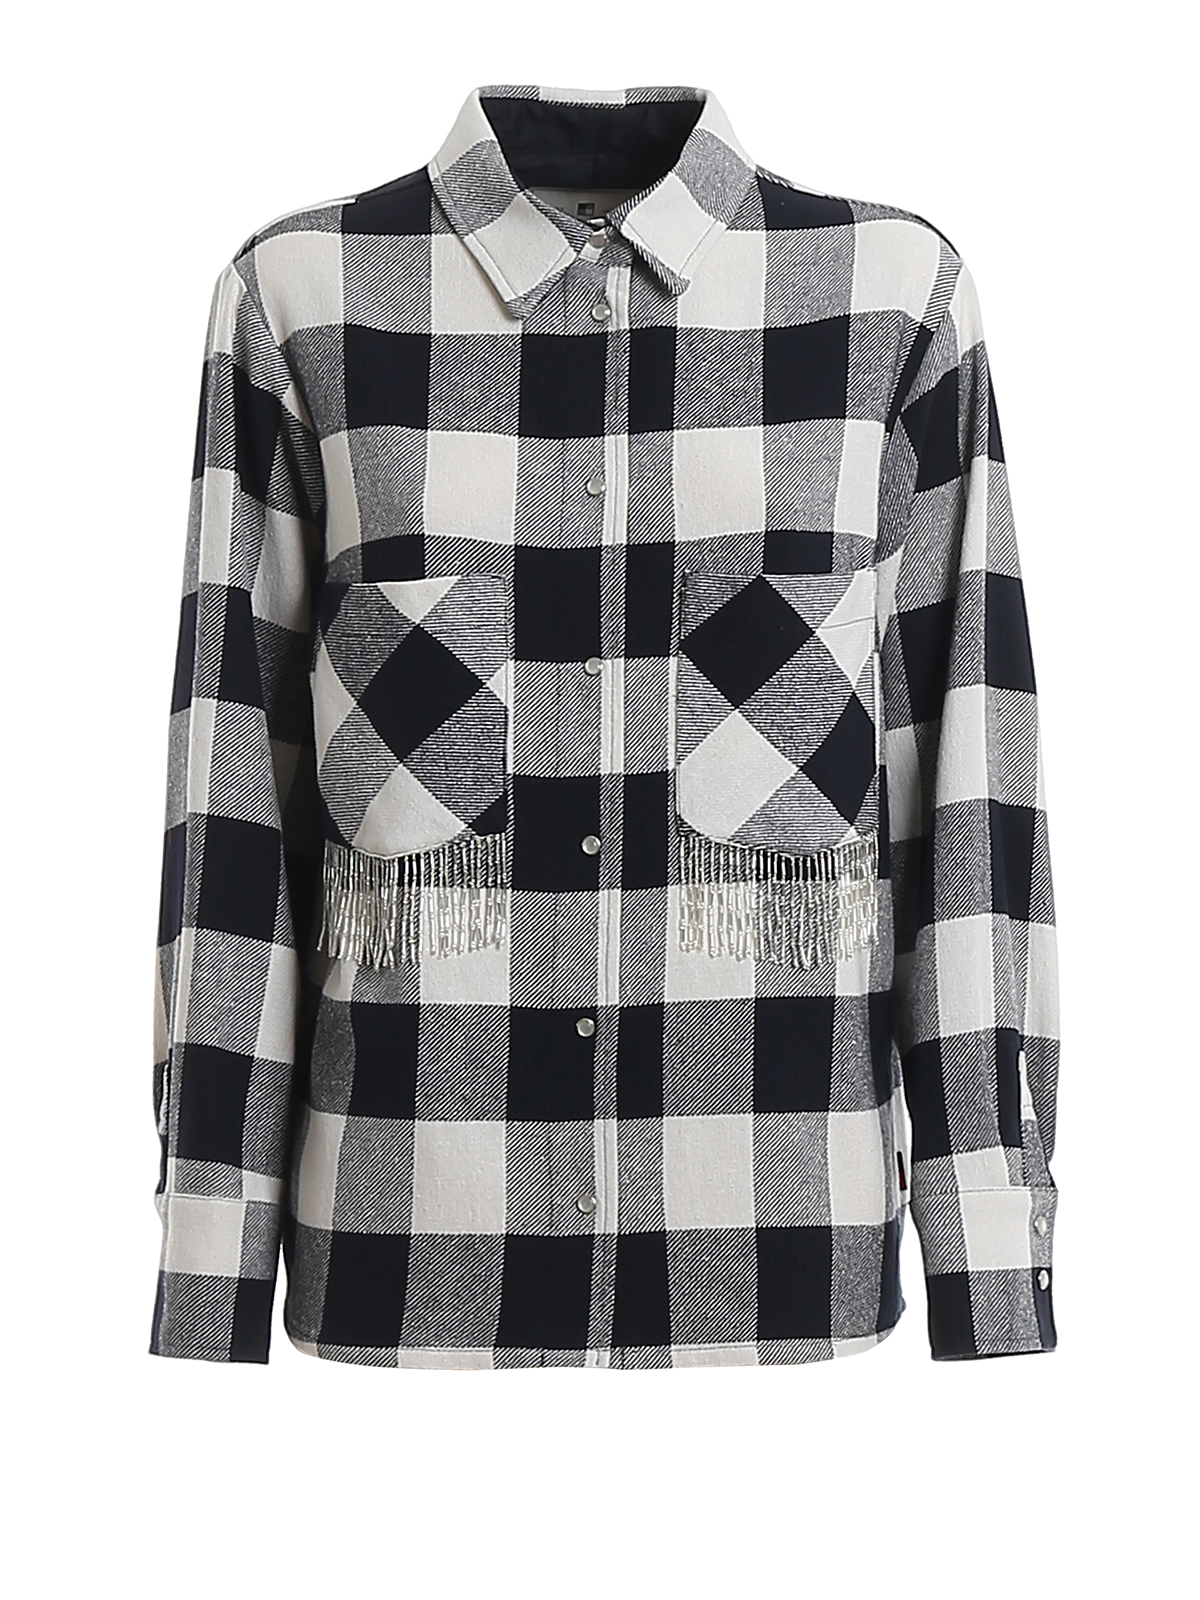 WOOLRICH BEADED CHECK FLANNEL SHIRT